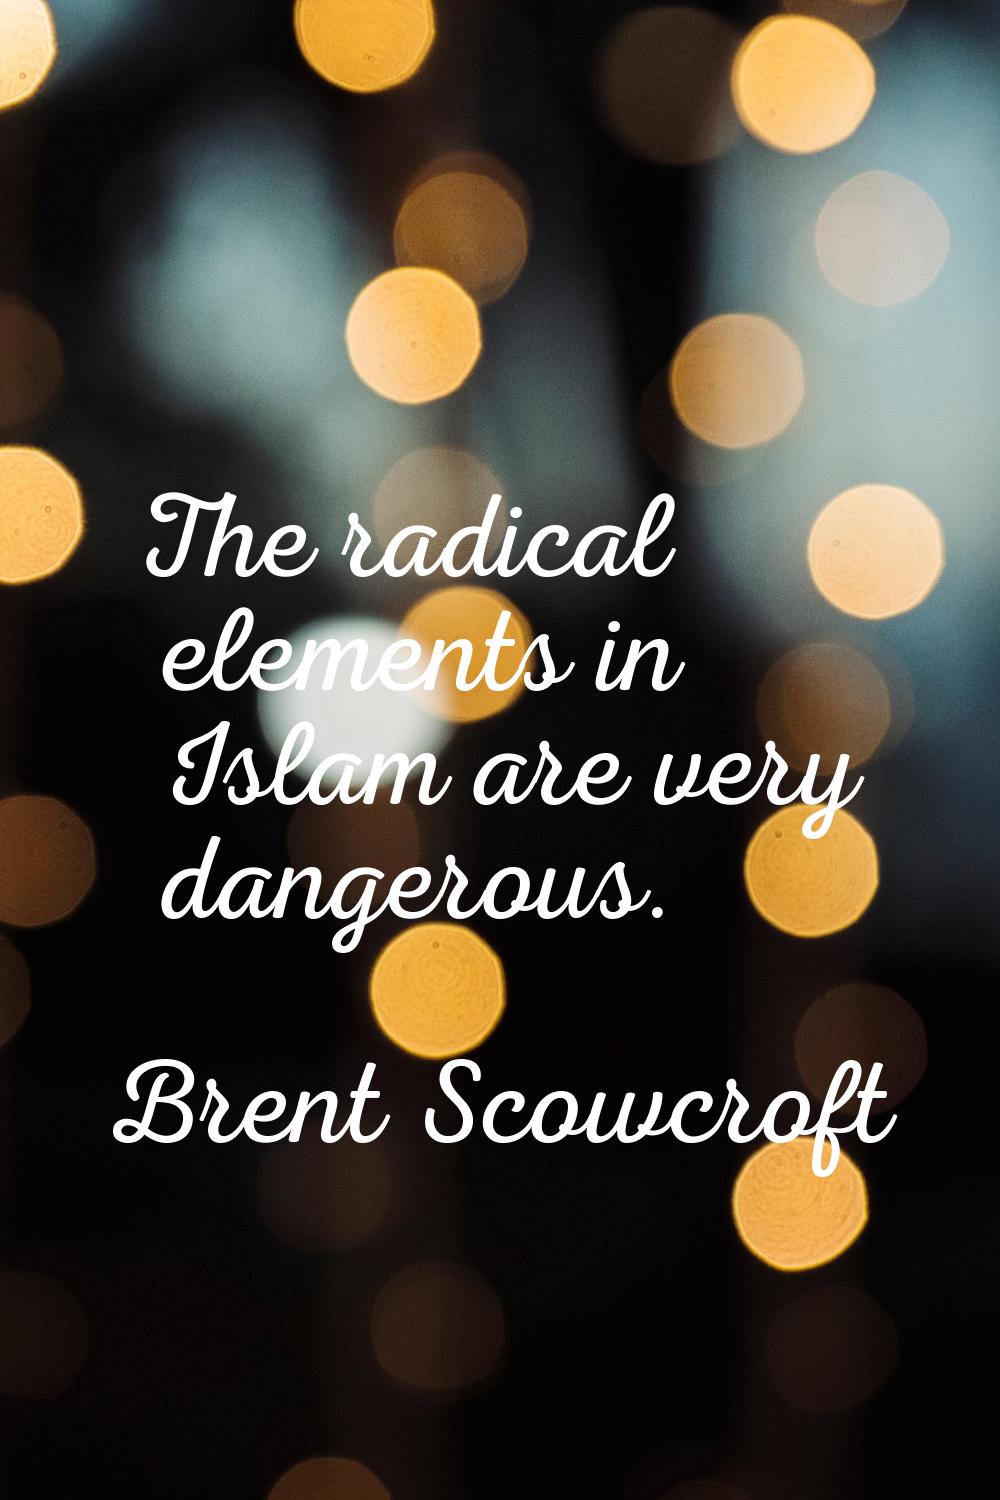 The radical elements in Islam are very dangerous.